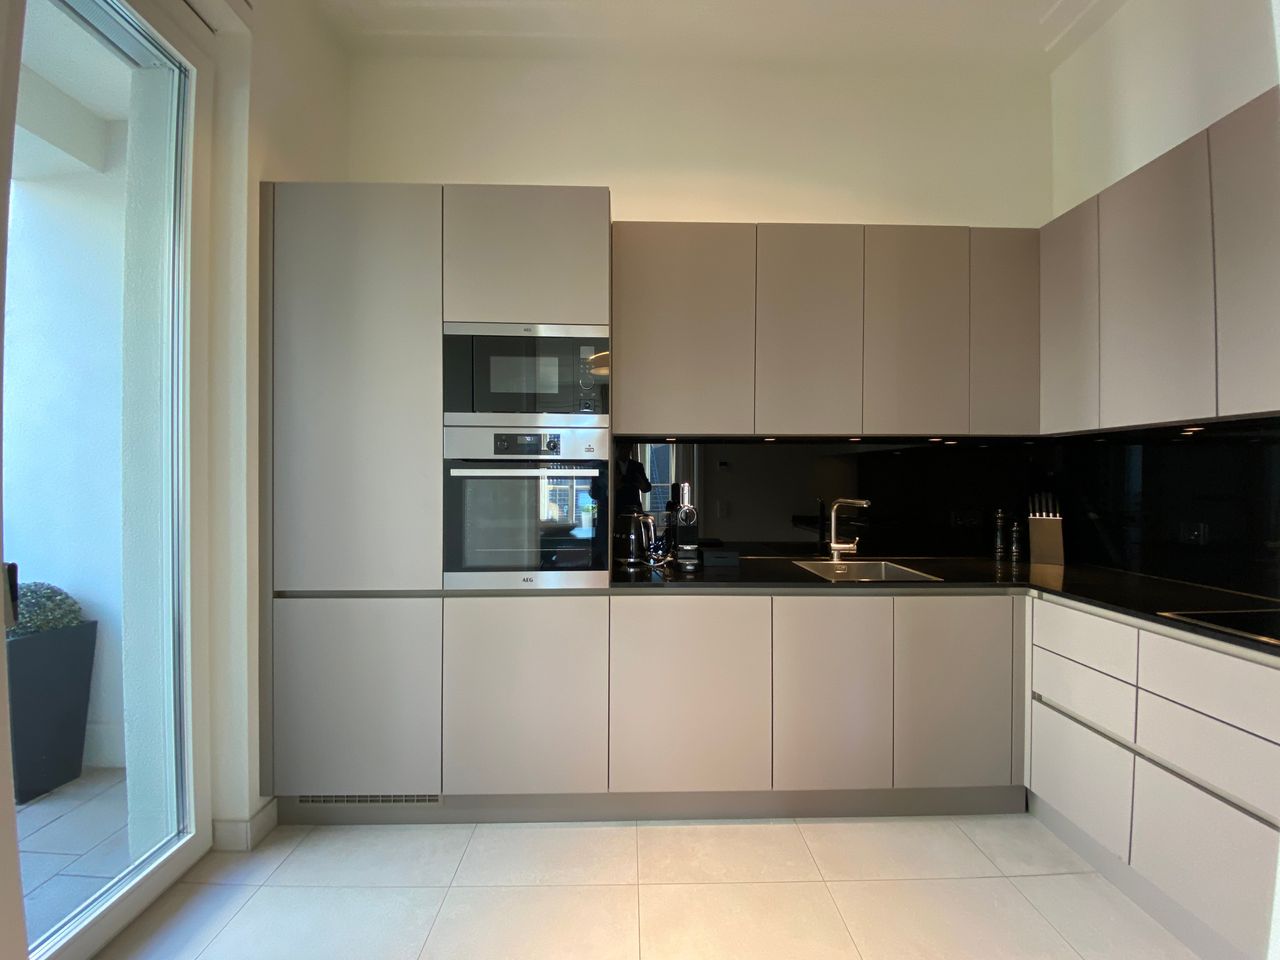 Large and cozy apartment on over 100sqm, high quality and lovingly furnished.